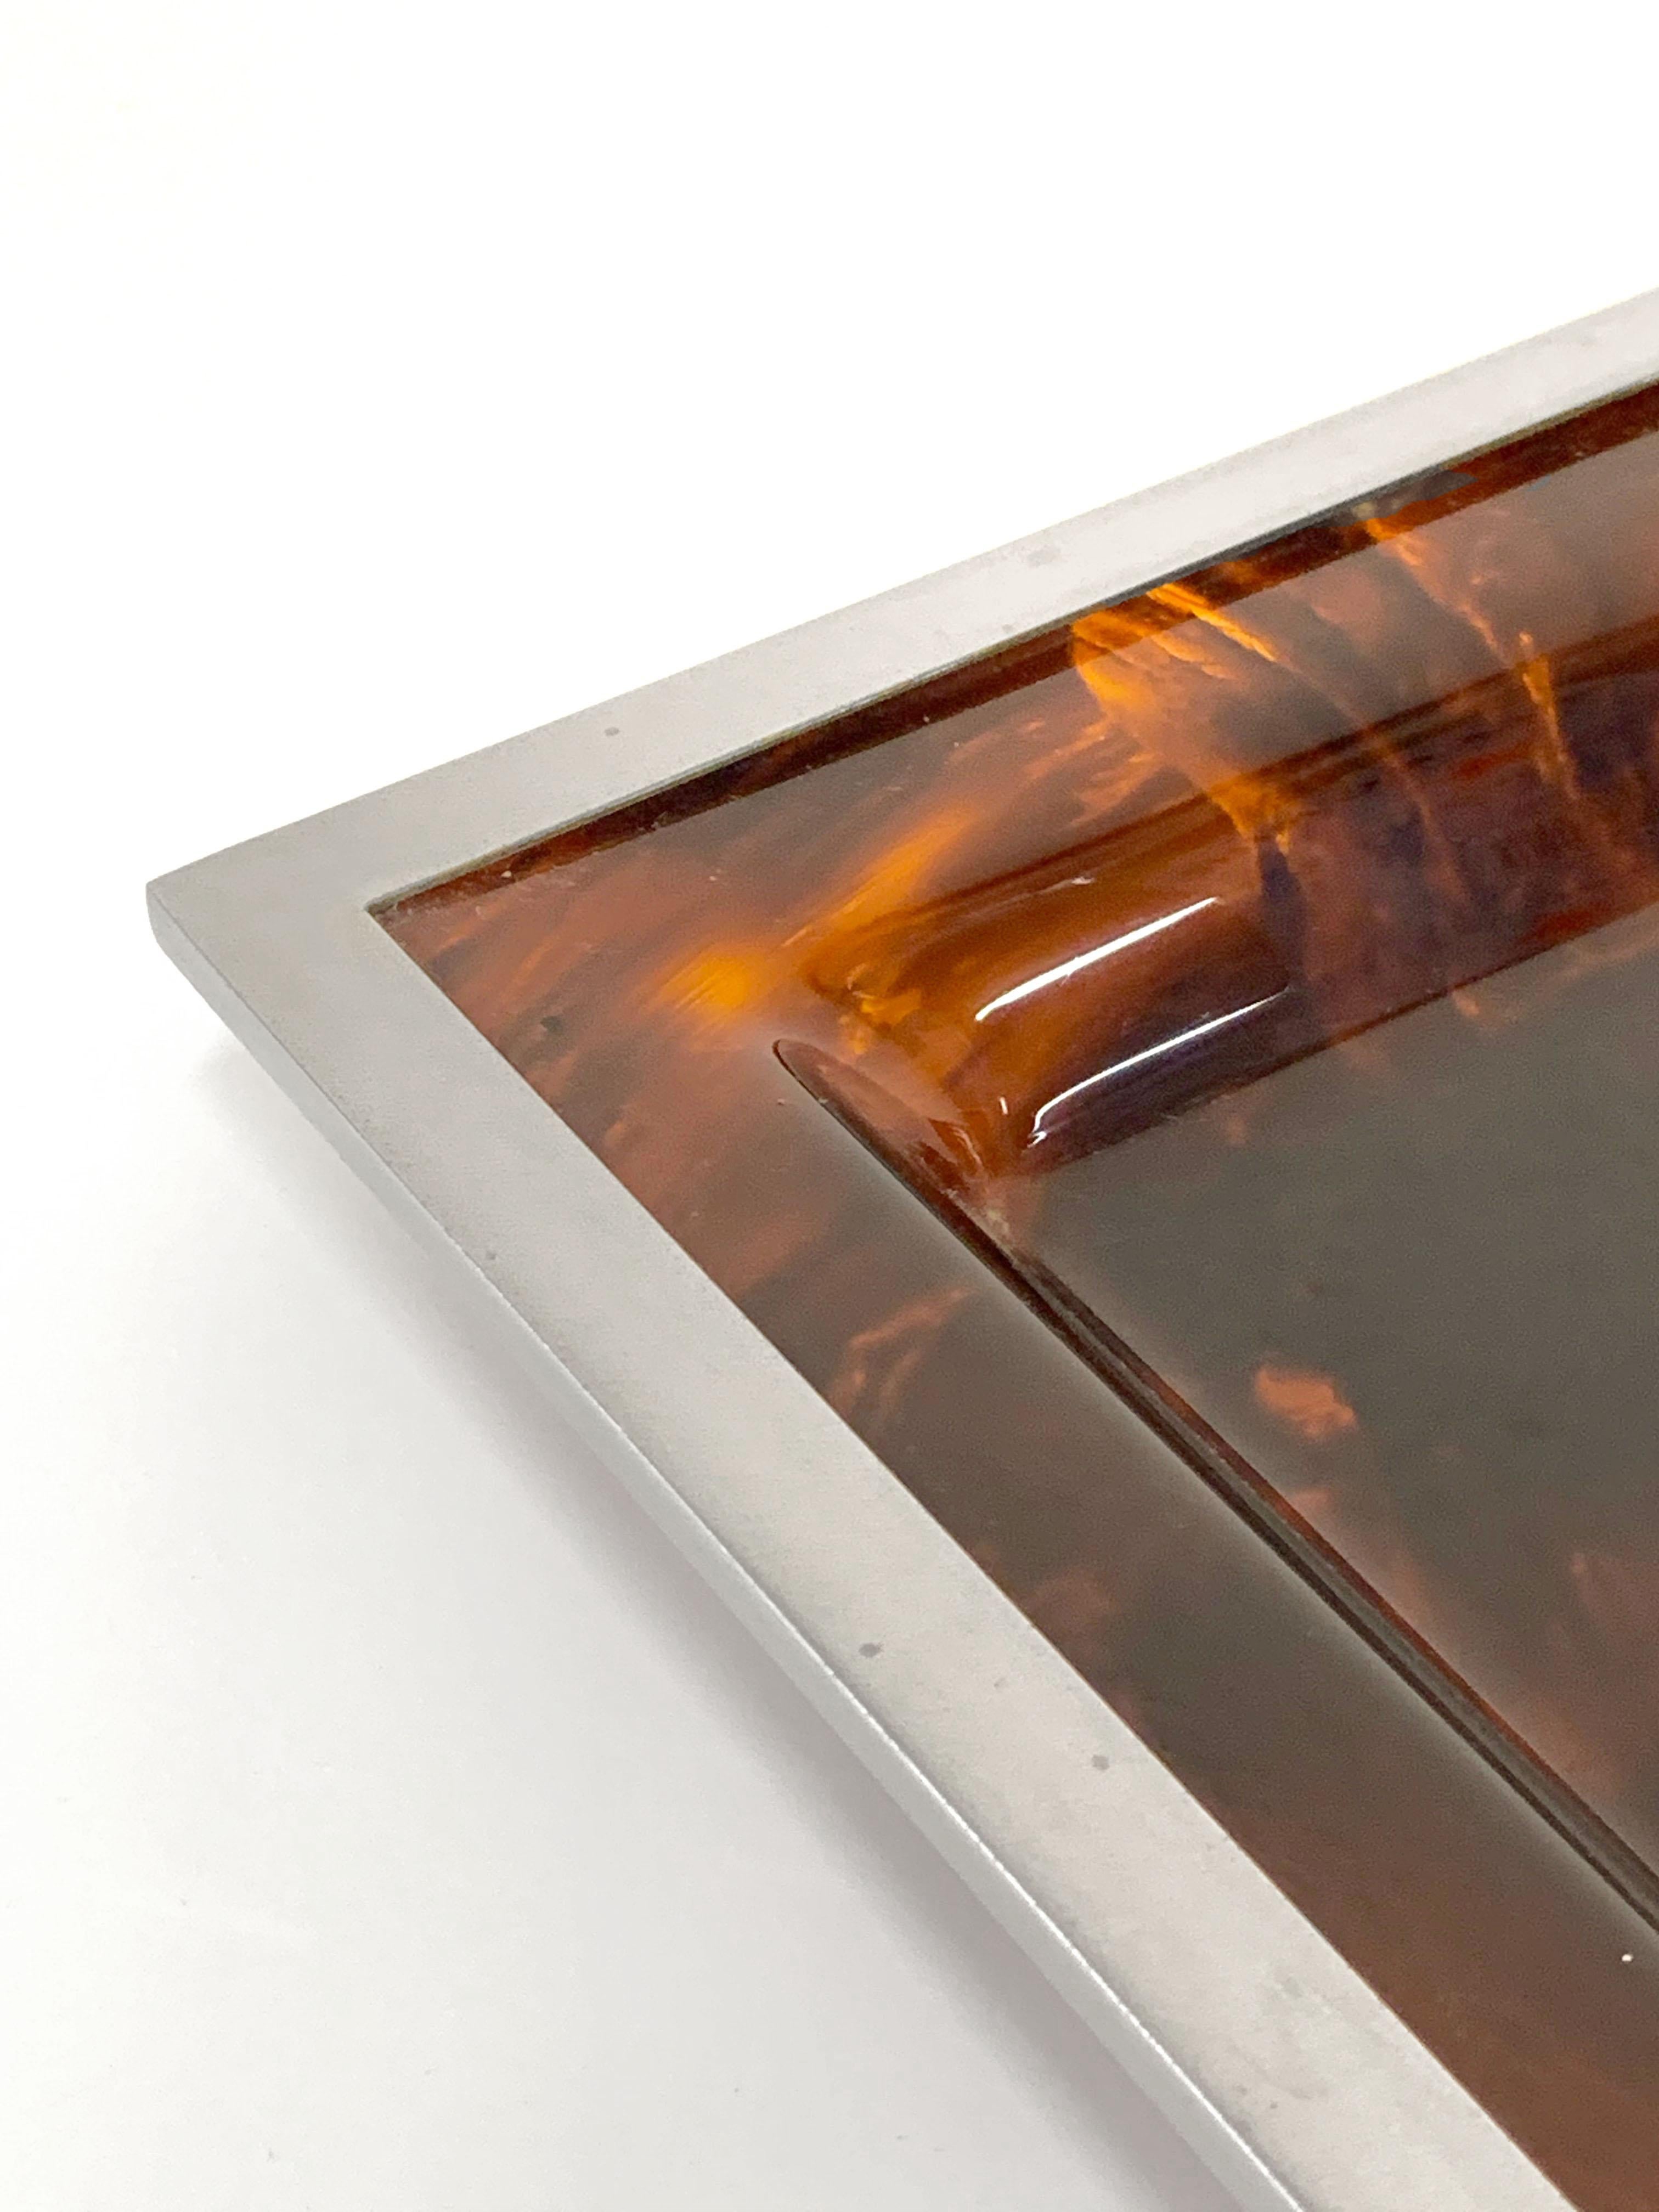 20th Century Midcentury Tortoiseshell and Lucite Italian Serving Tray after Willy Rizzo 1970s